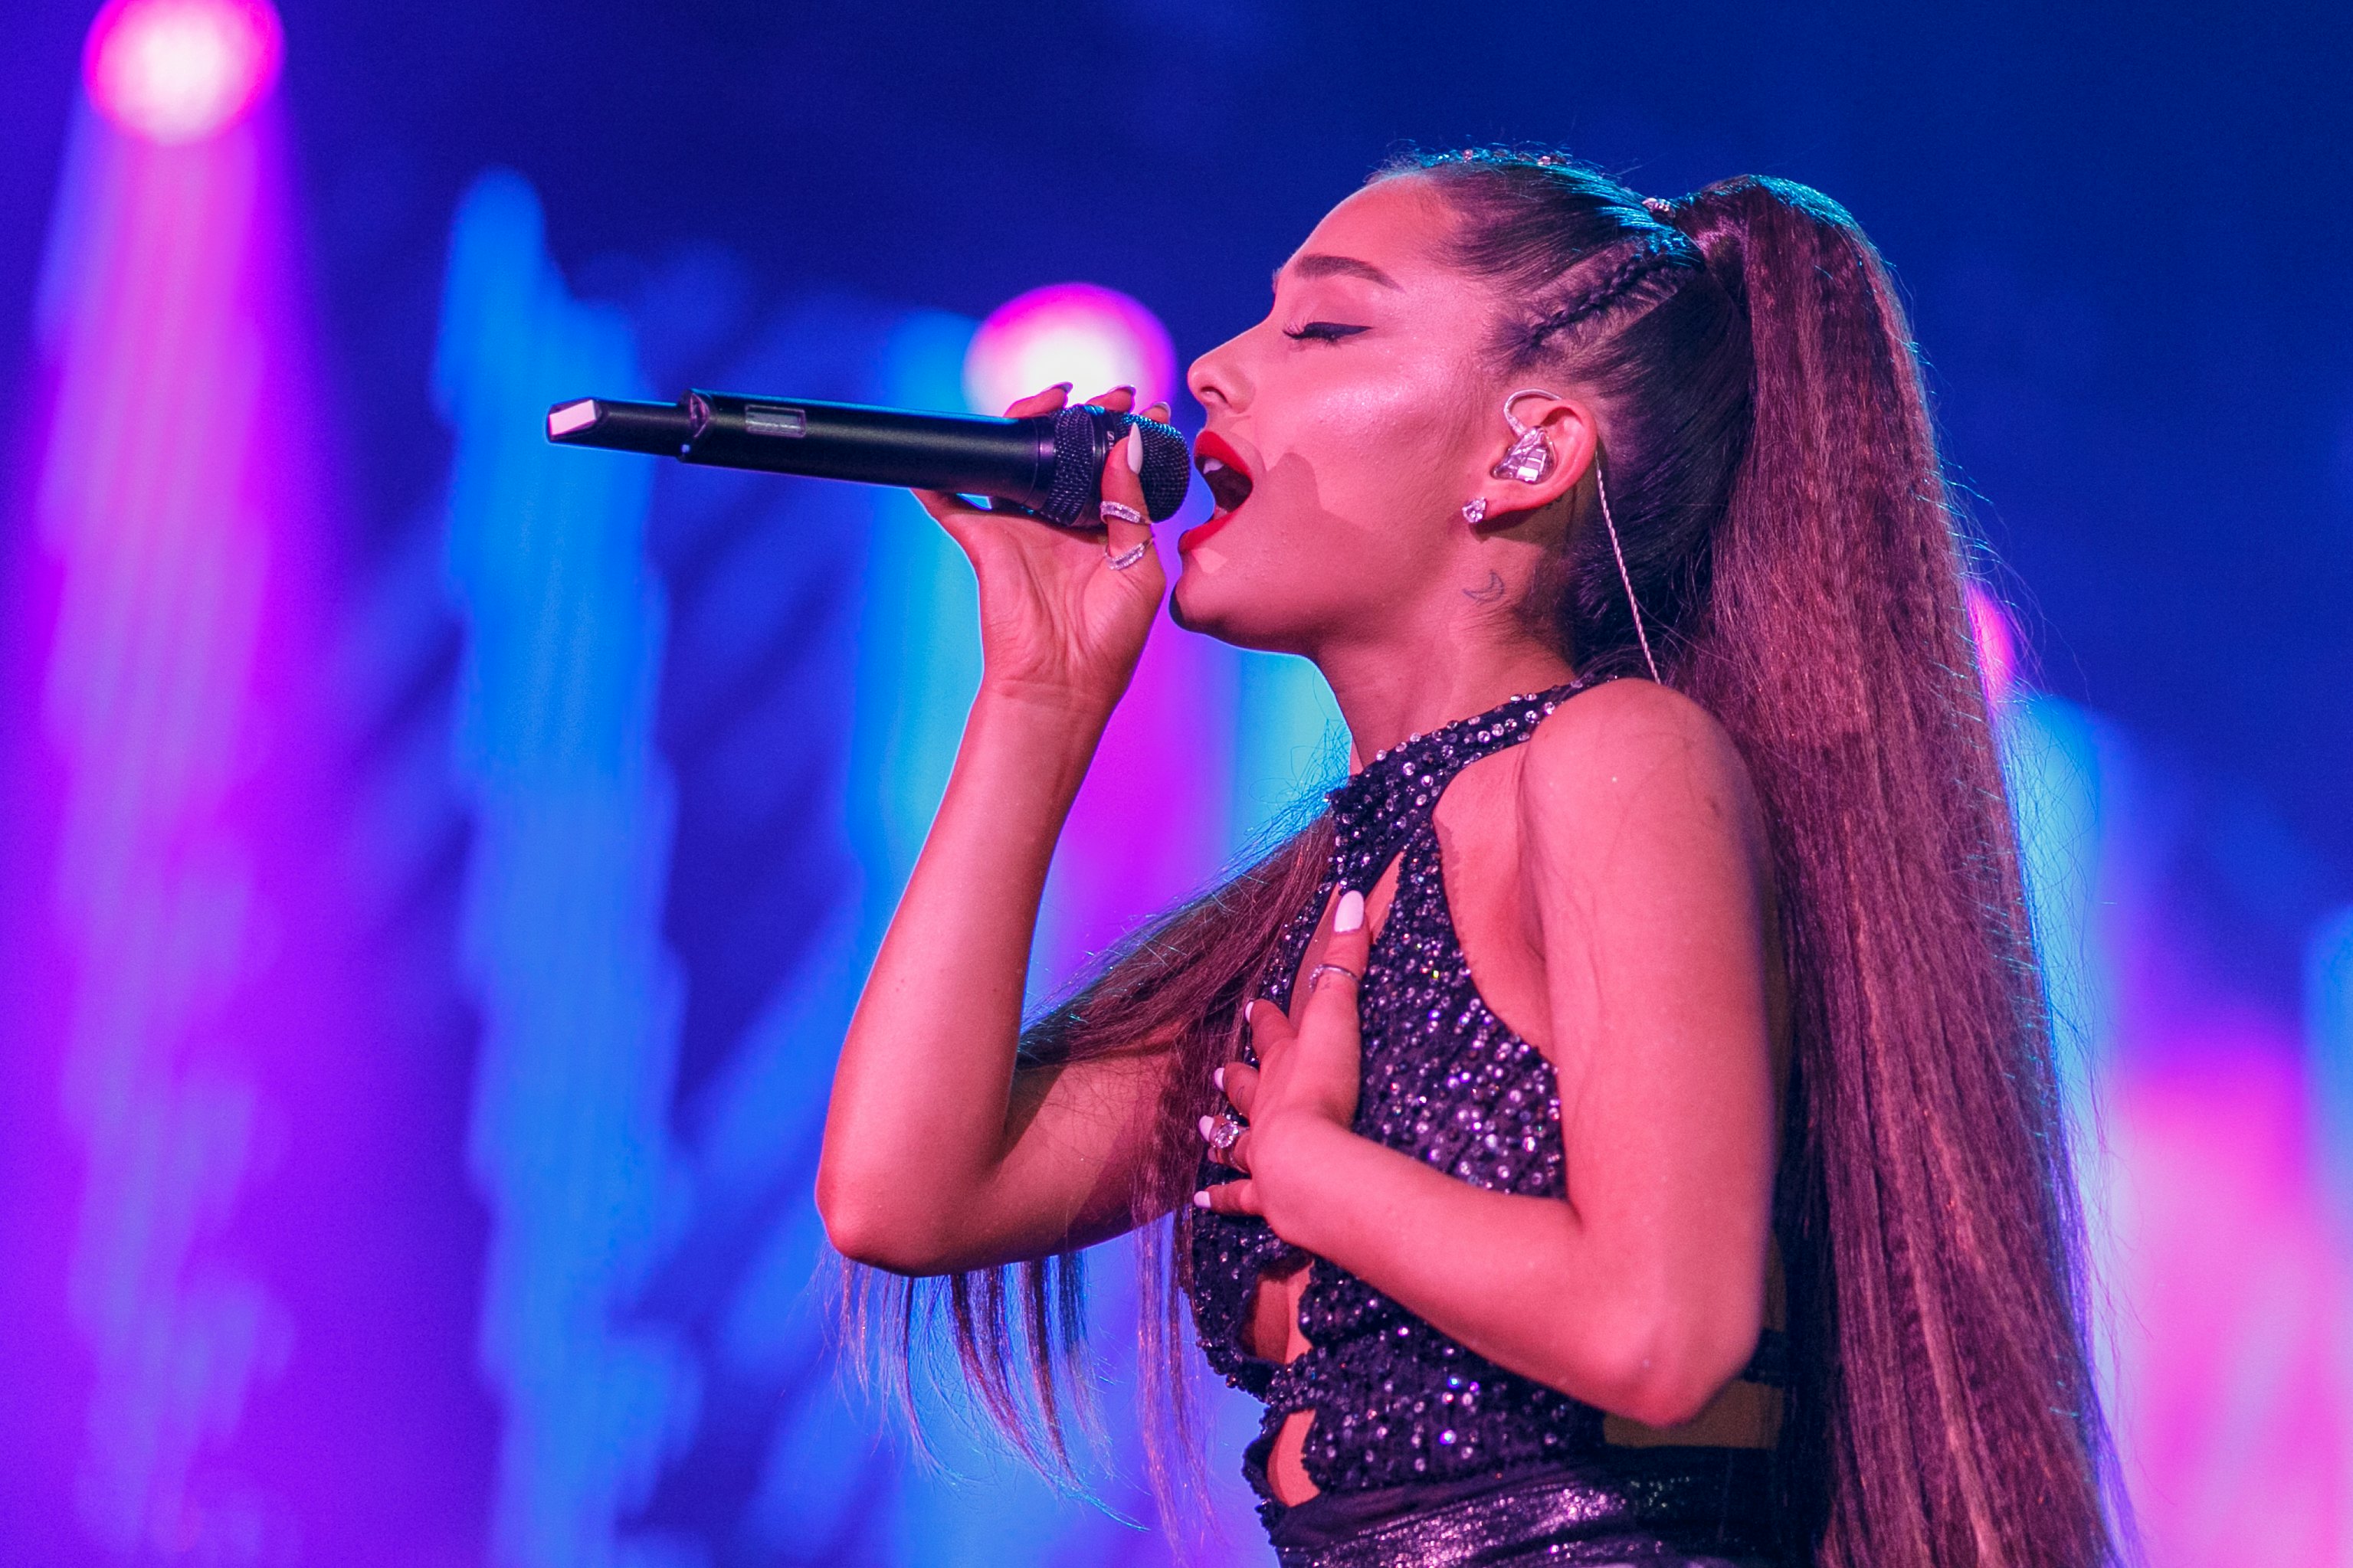 Is Ariana Grande Going On Tour The Singer Teased Dates For